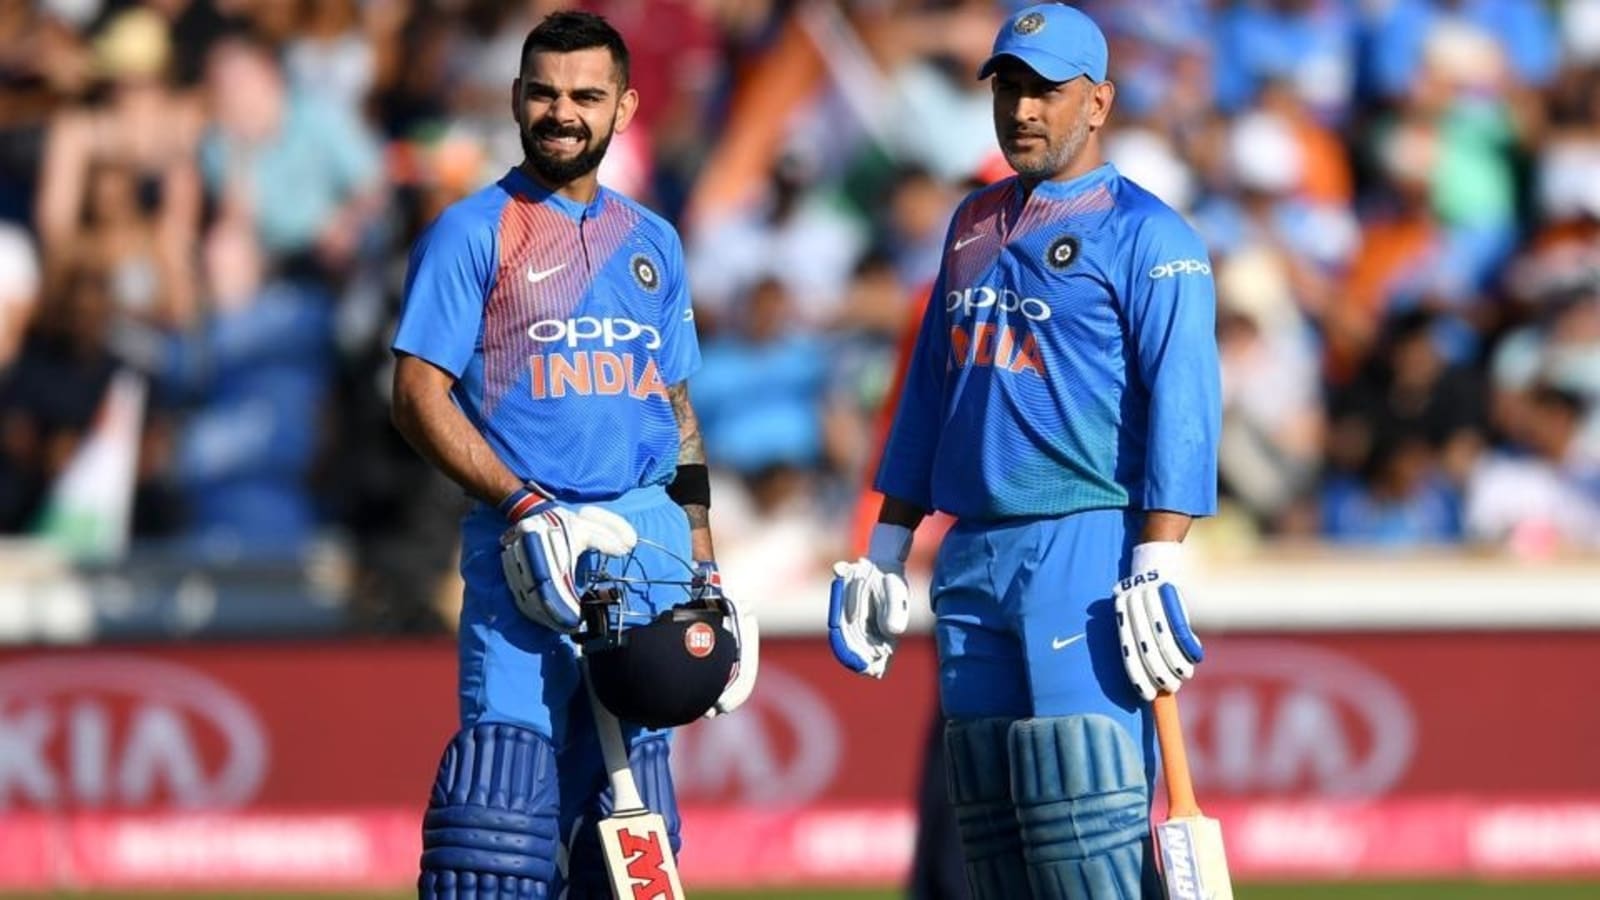 Absolutely Delighted Virat Kohli On Ms Dhoni Being With Team